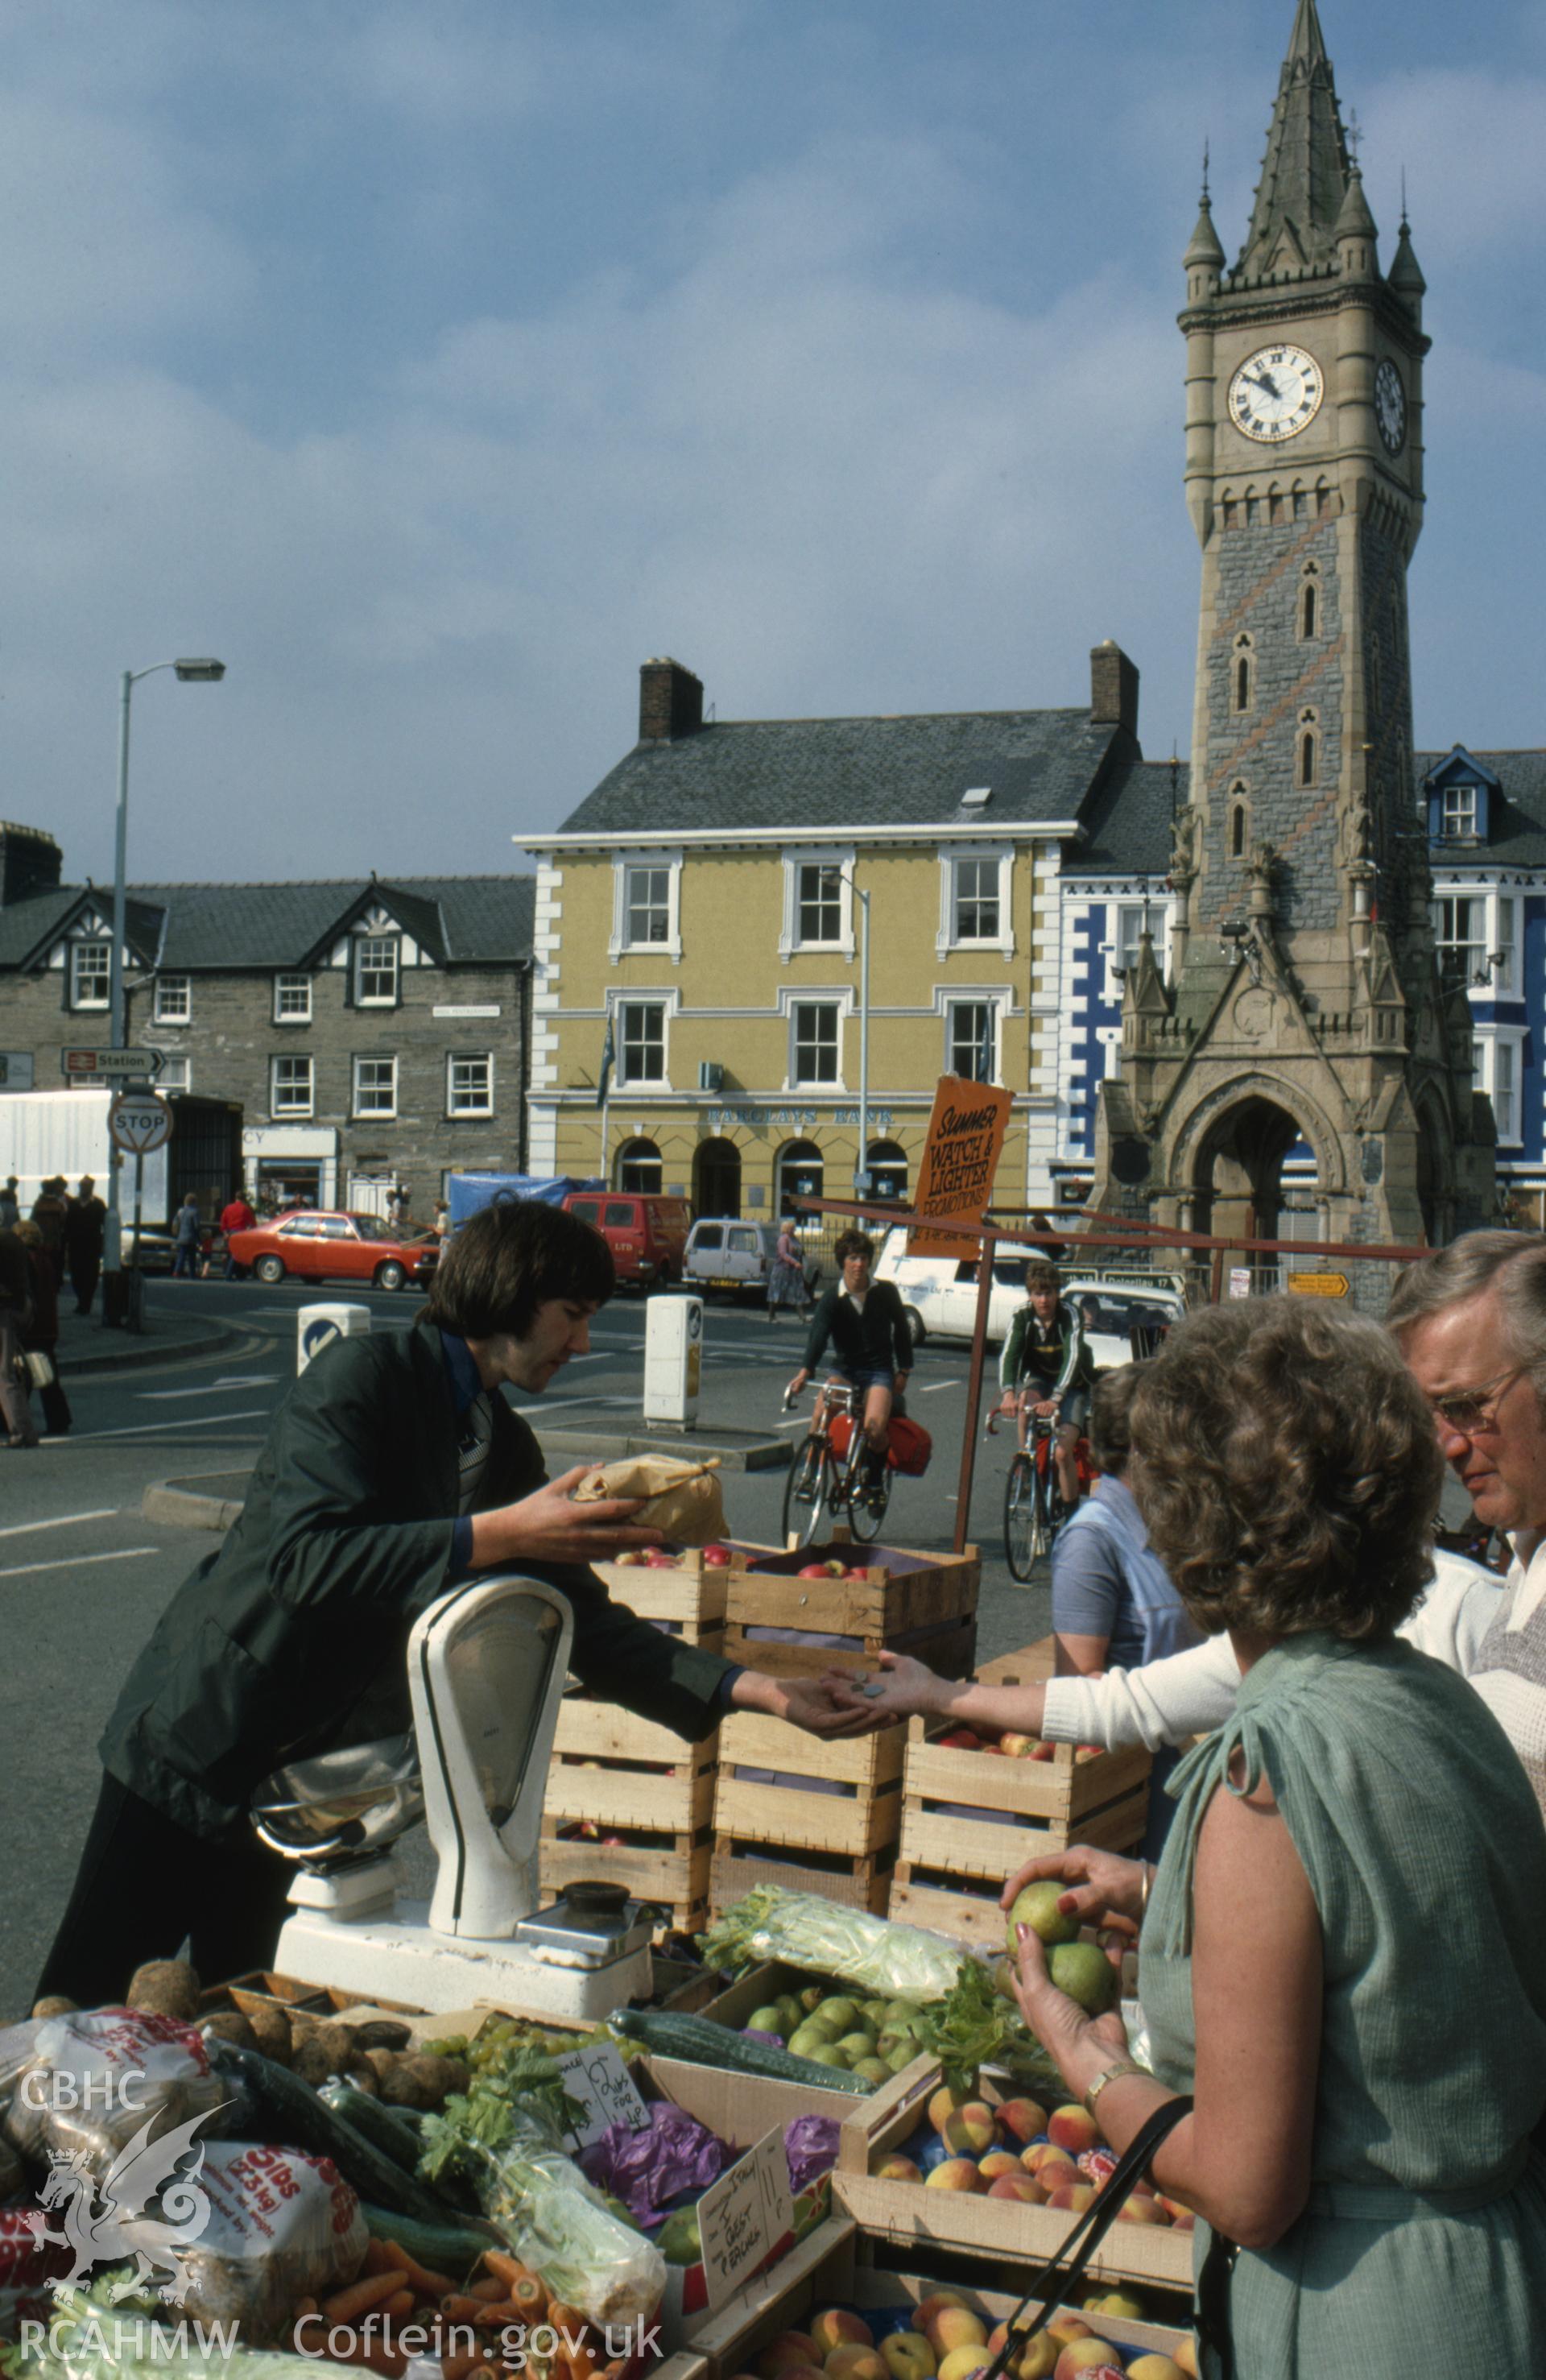 Colour photographic transparency showing view of Machynlleth town with stalls on market day; collated by the former Central Office of Information.